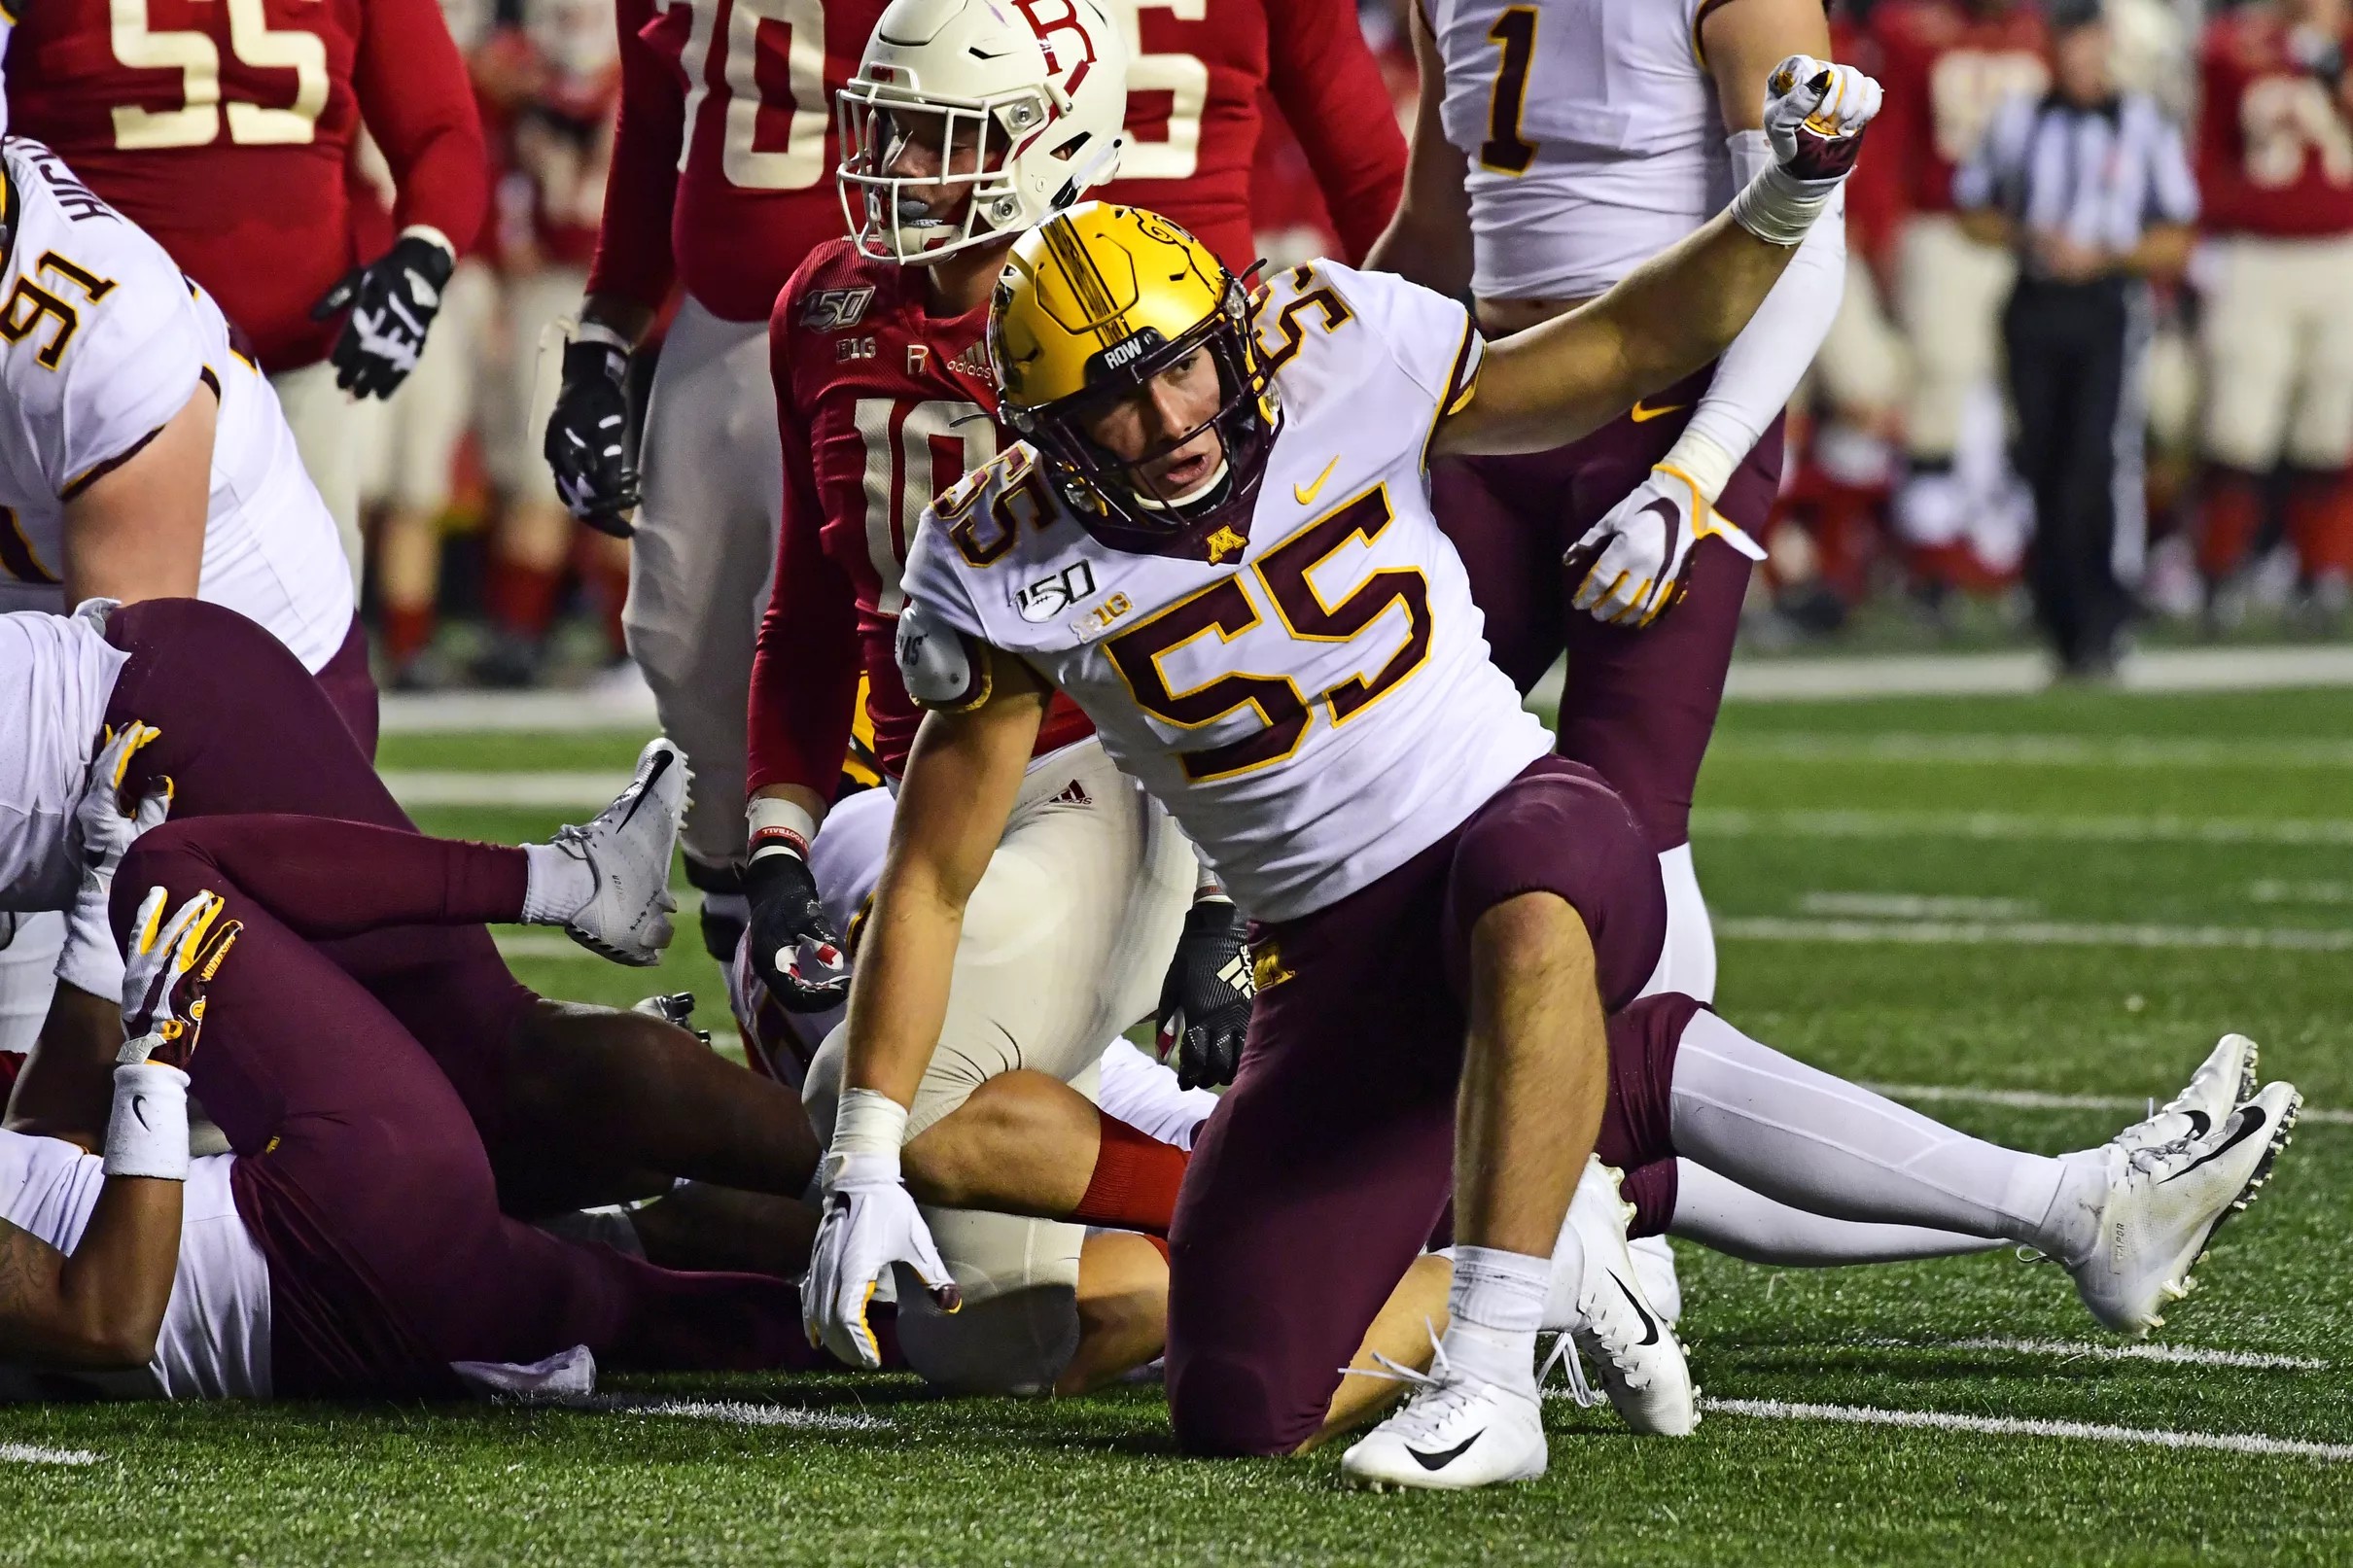 2020 Minnesota Gopher Football Preview Upgrade or downgrade at linebacker?